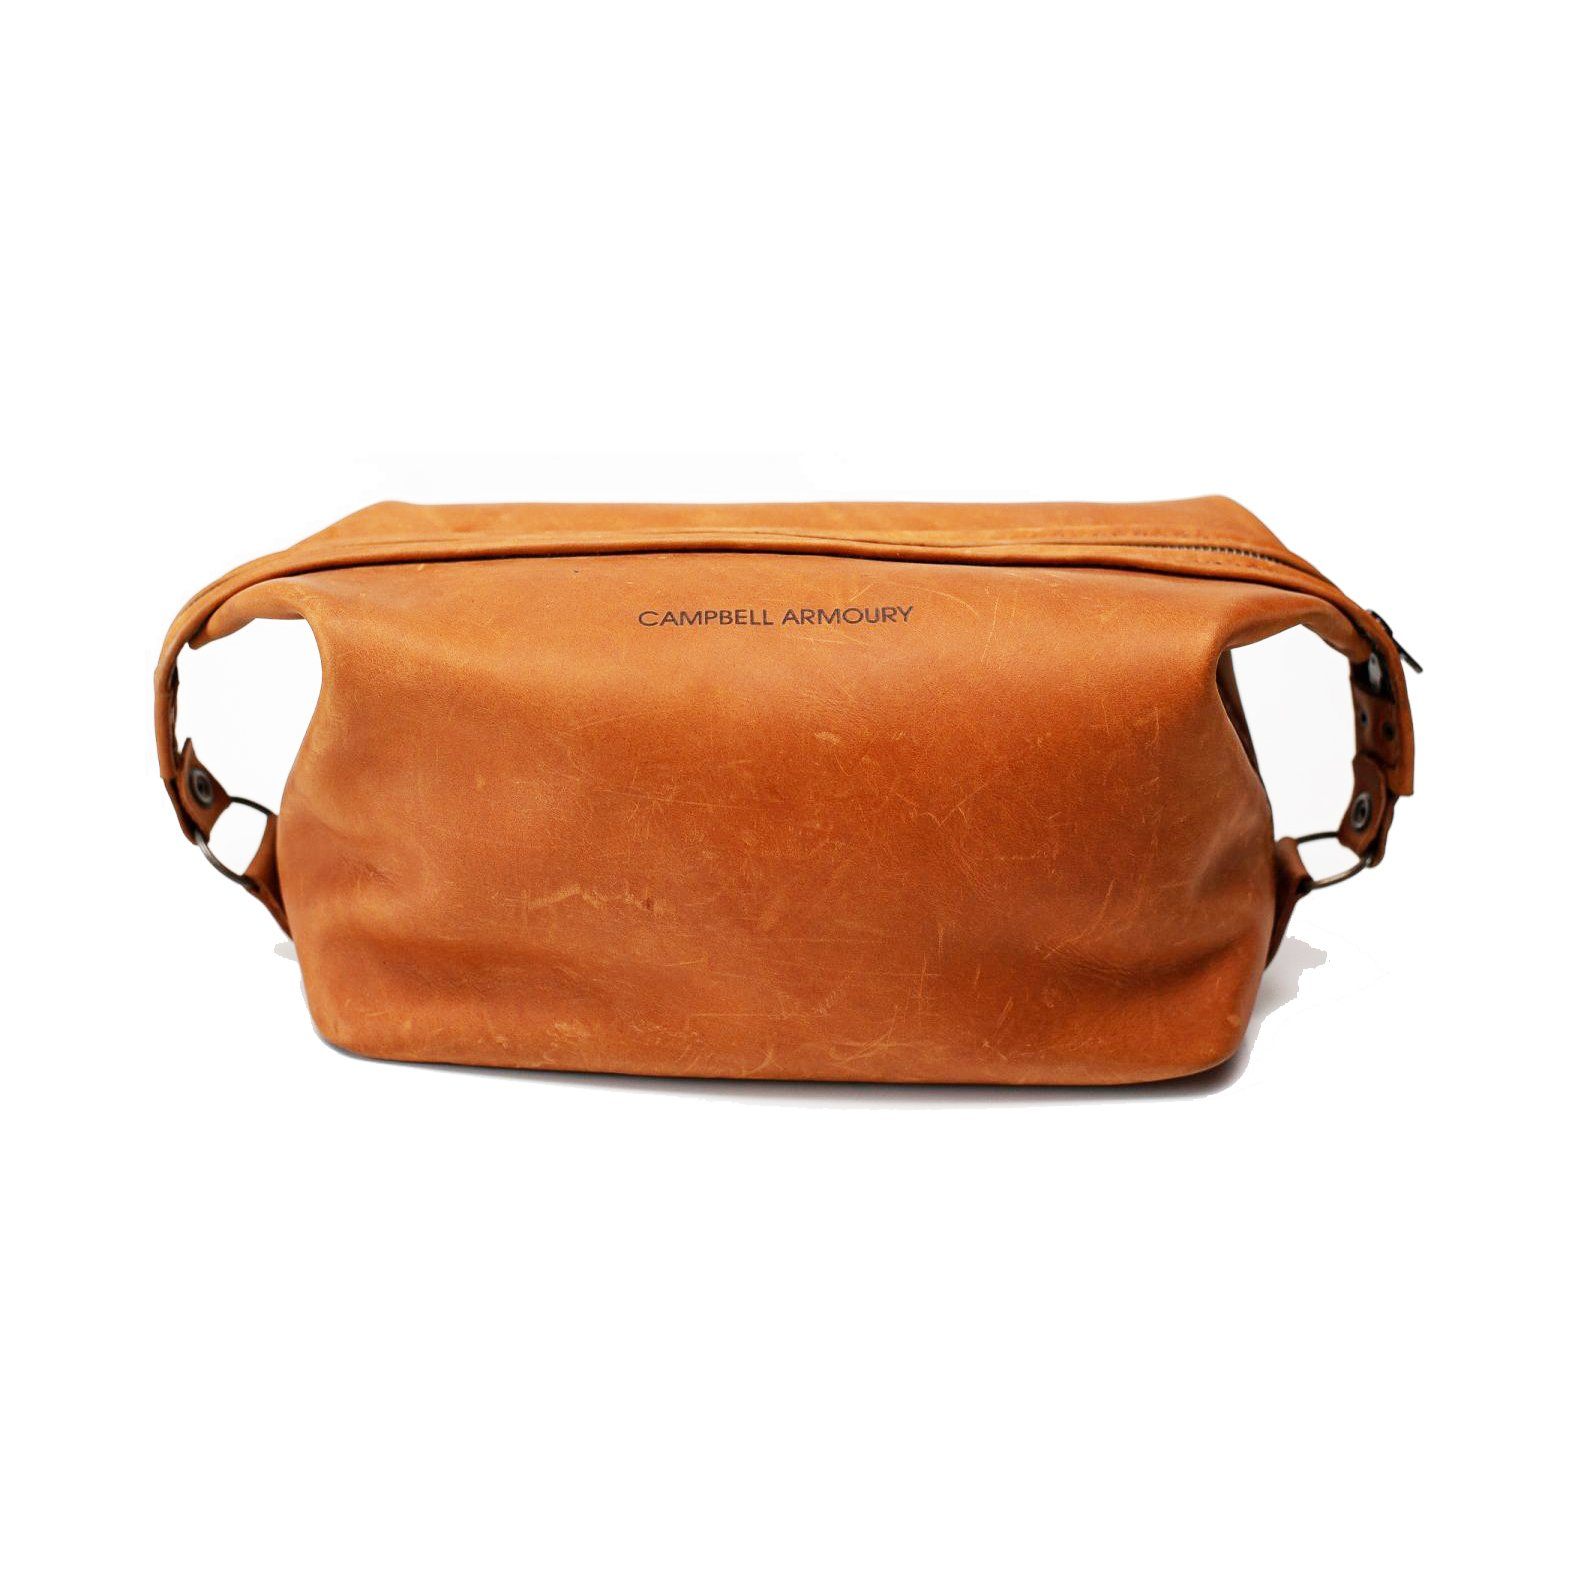 Campbell Armoury Leather Toiletry Bag clothing & accessories Campbell Armoury tan